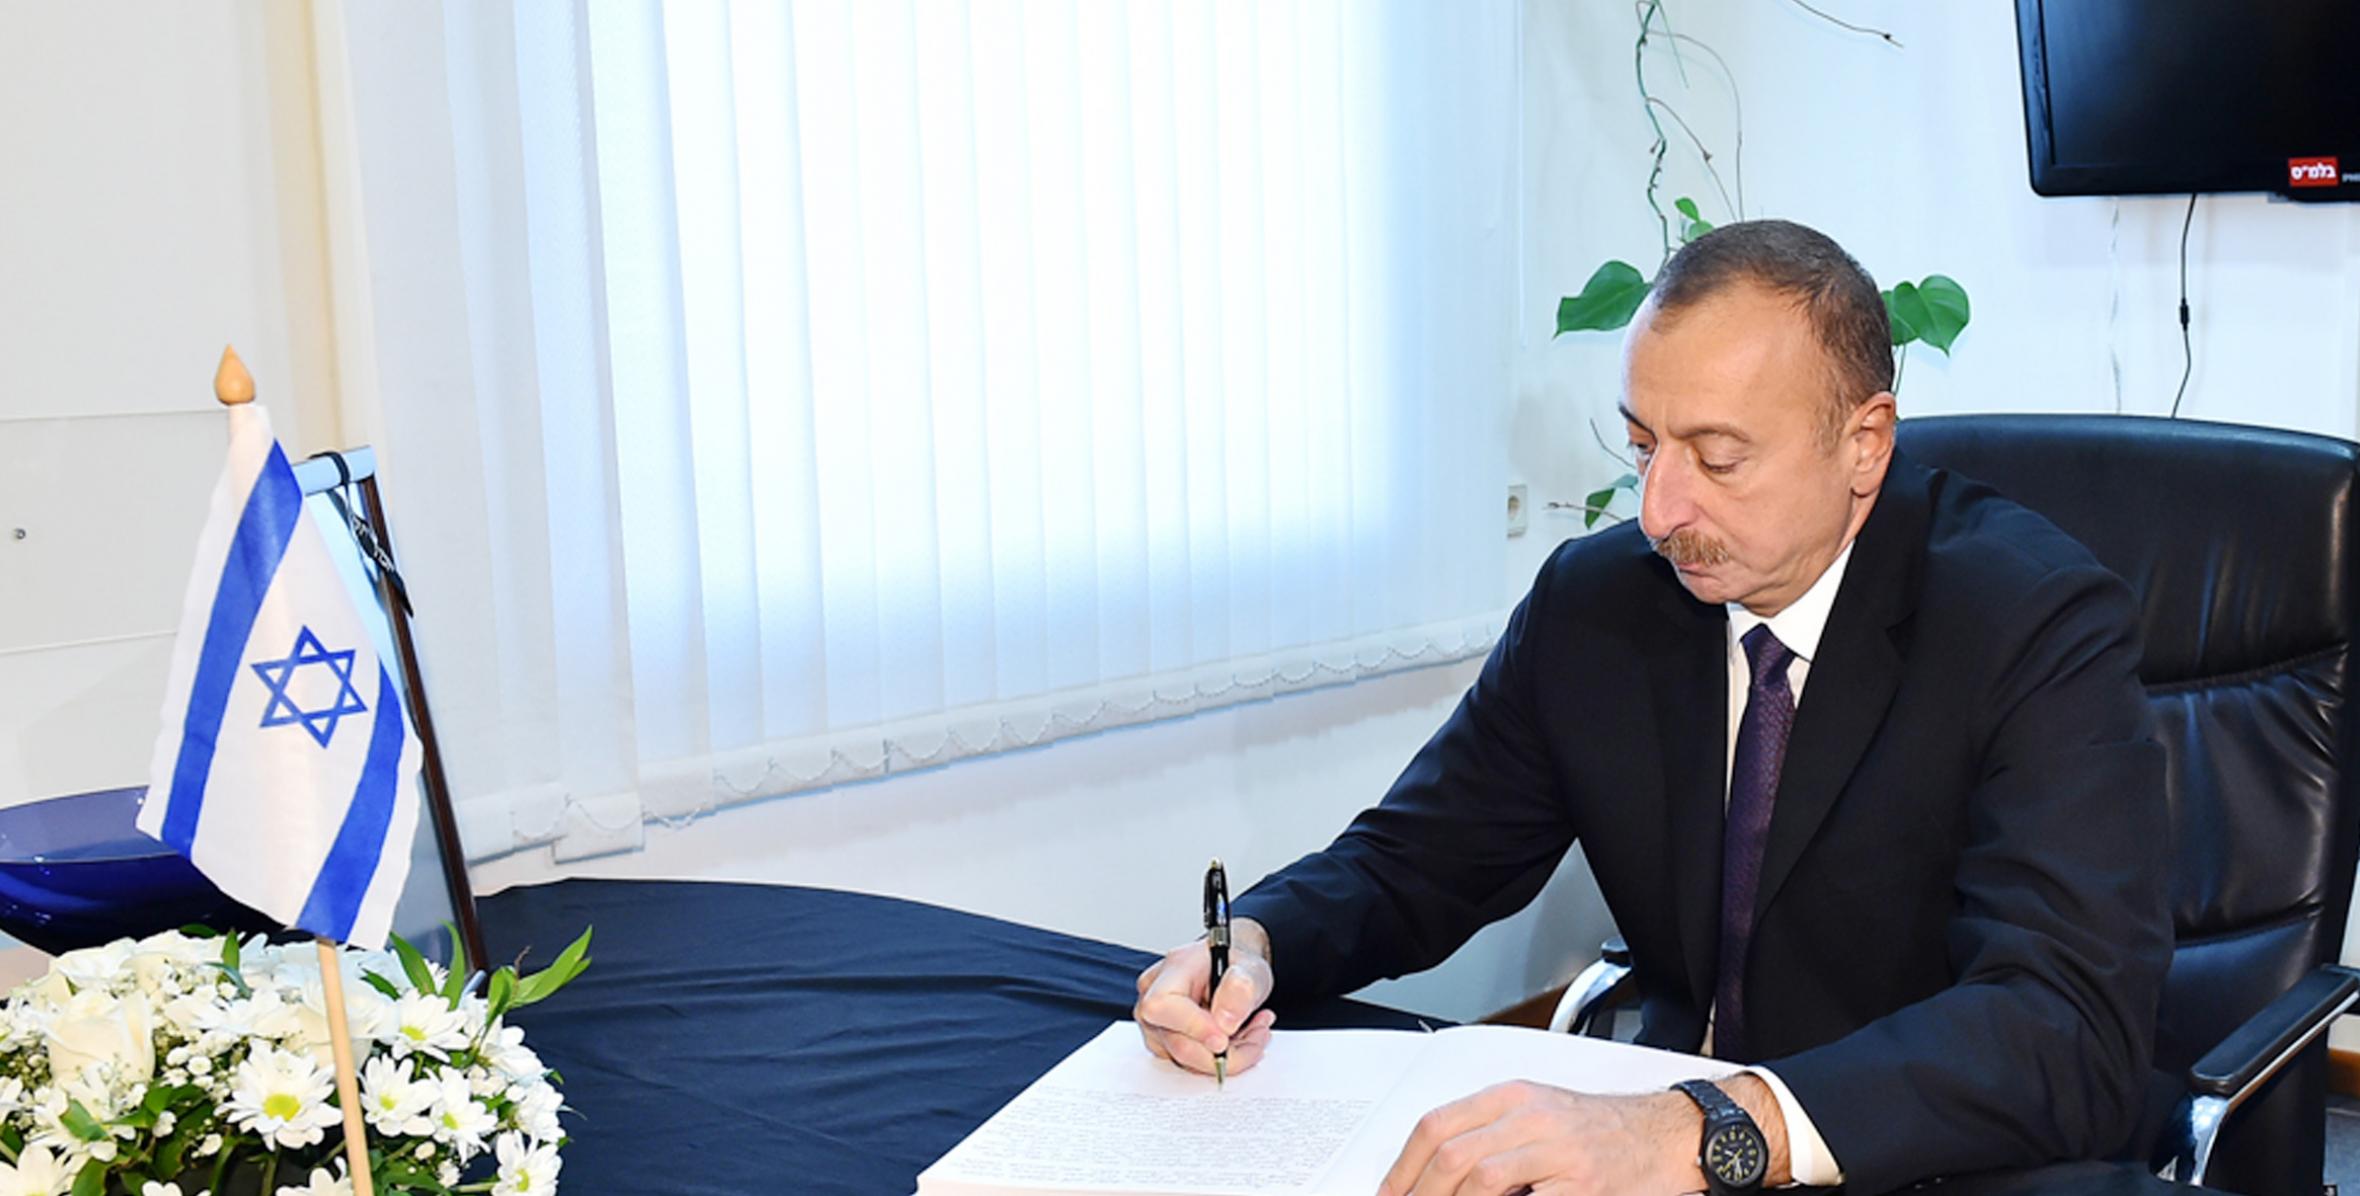 Ilham Aliyev visited Embassy of Israel, offered condolences over death of former President Shimon Peres